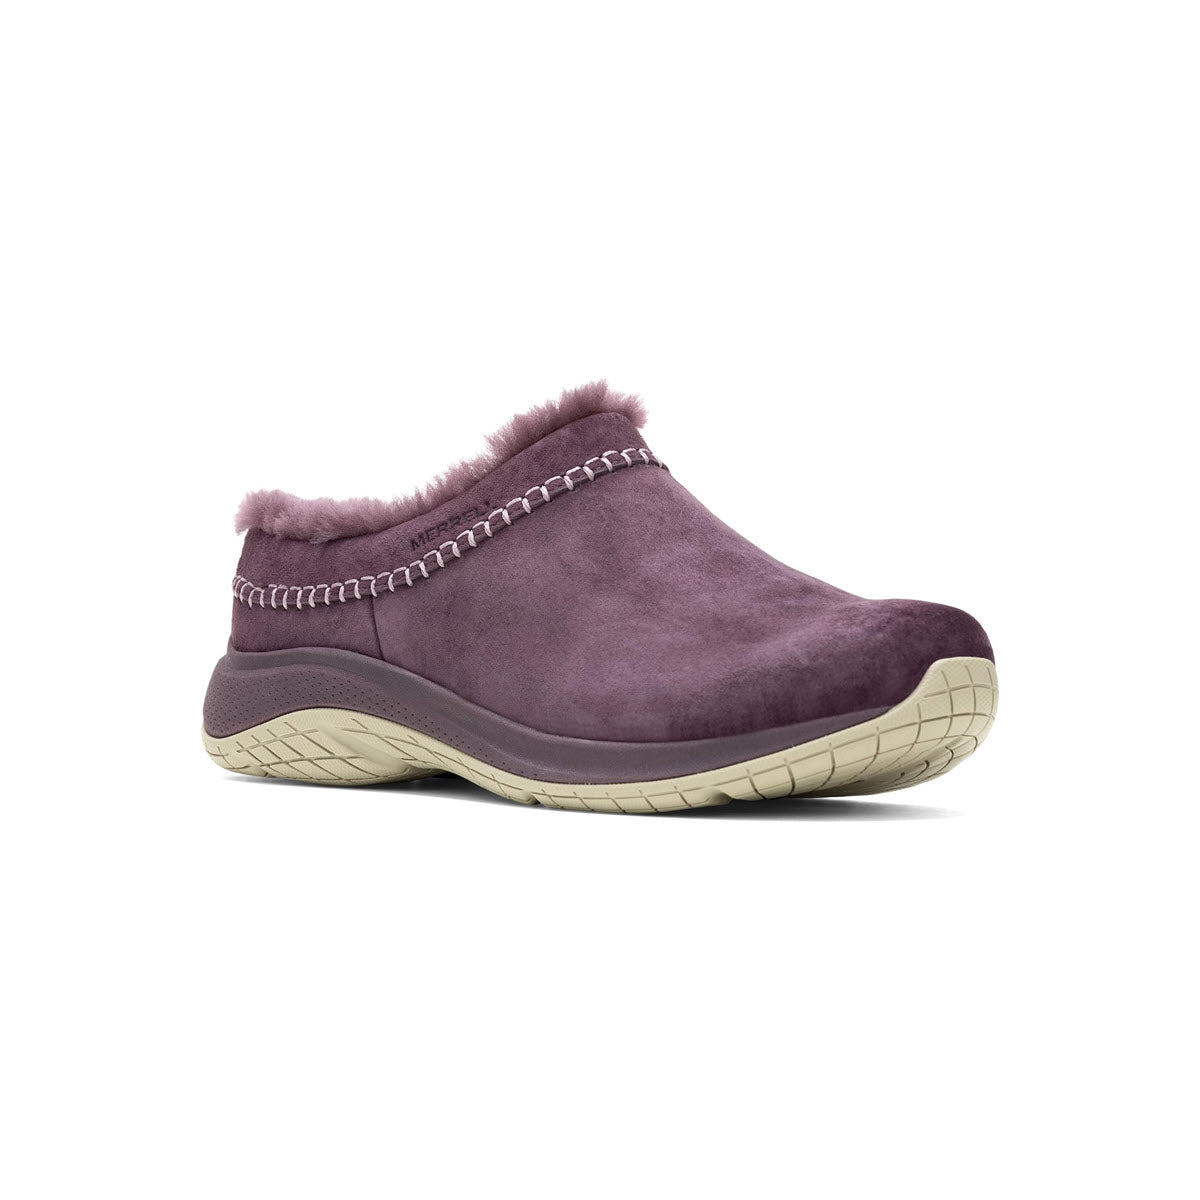 A single Merrell Encore Ice 5 Burgundy slip-on shoe with a cozy sheepskin lining and a light beige rubber sole, displayed against a white background.